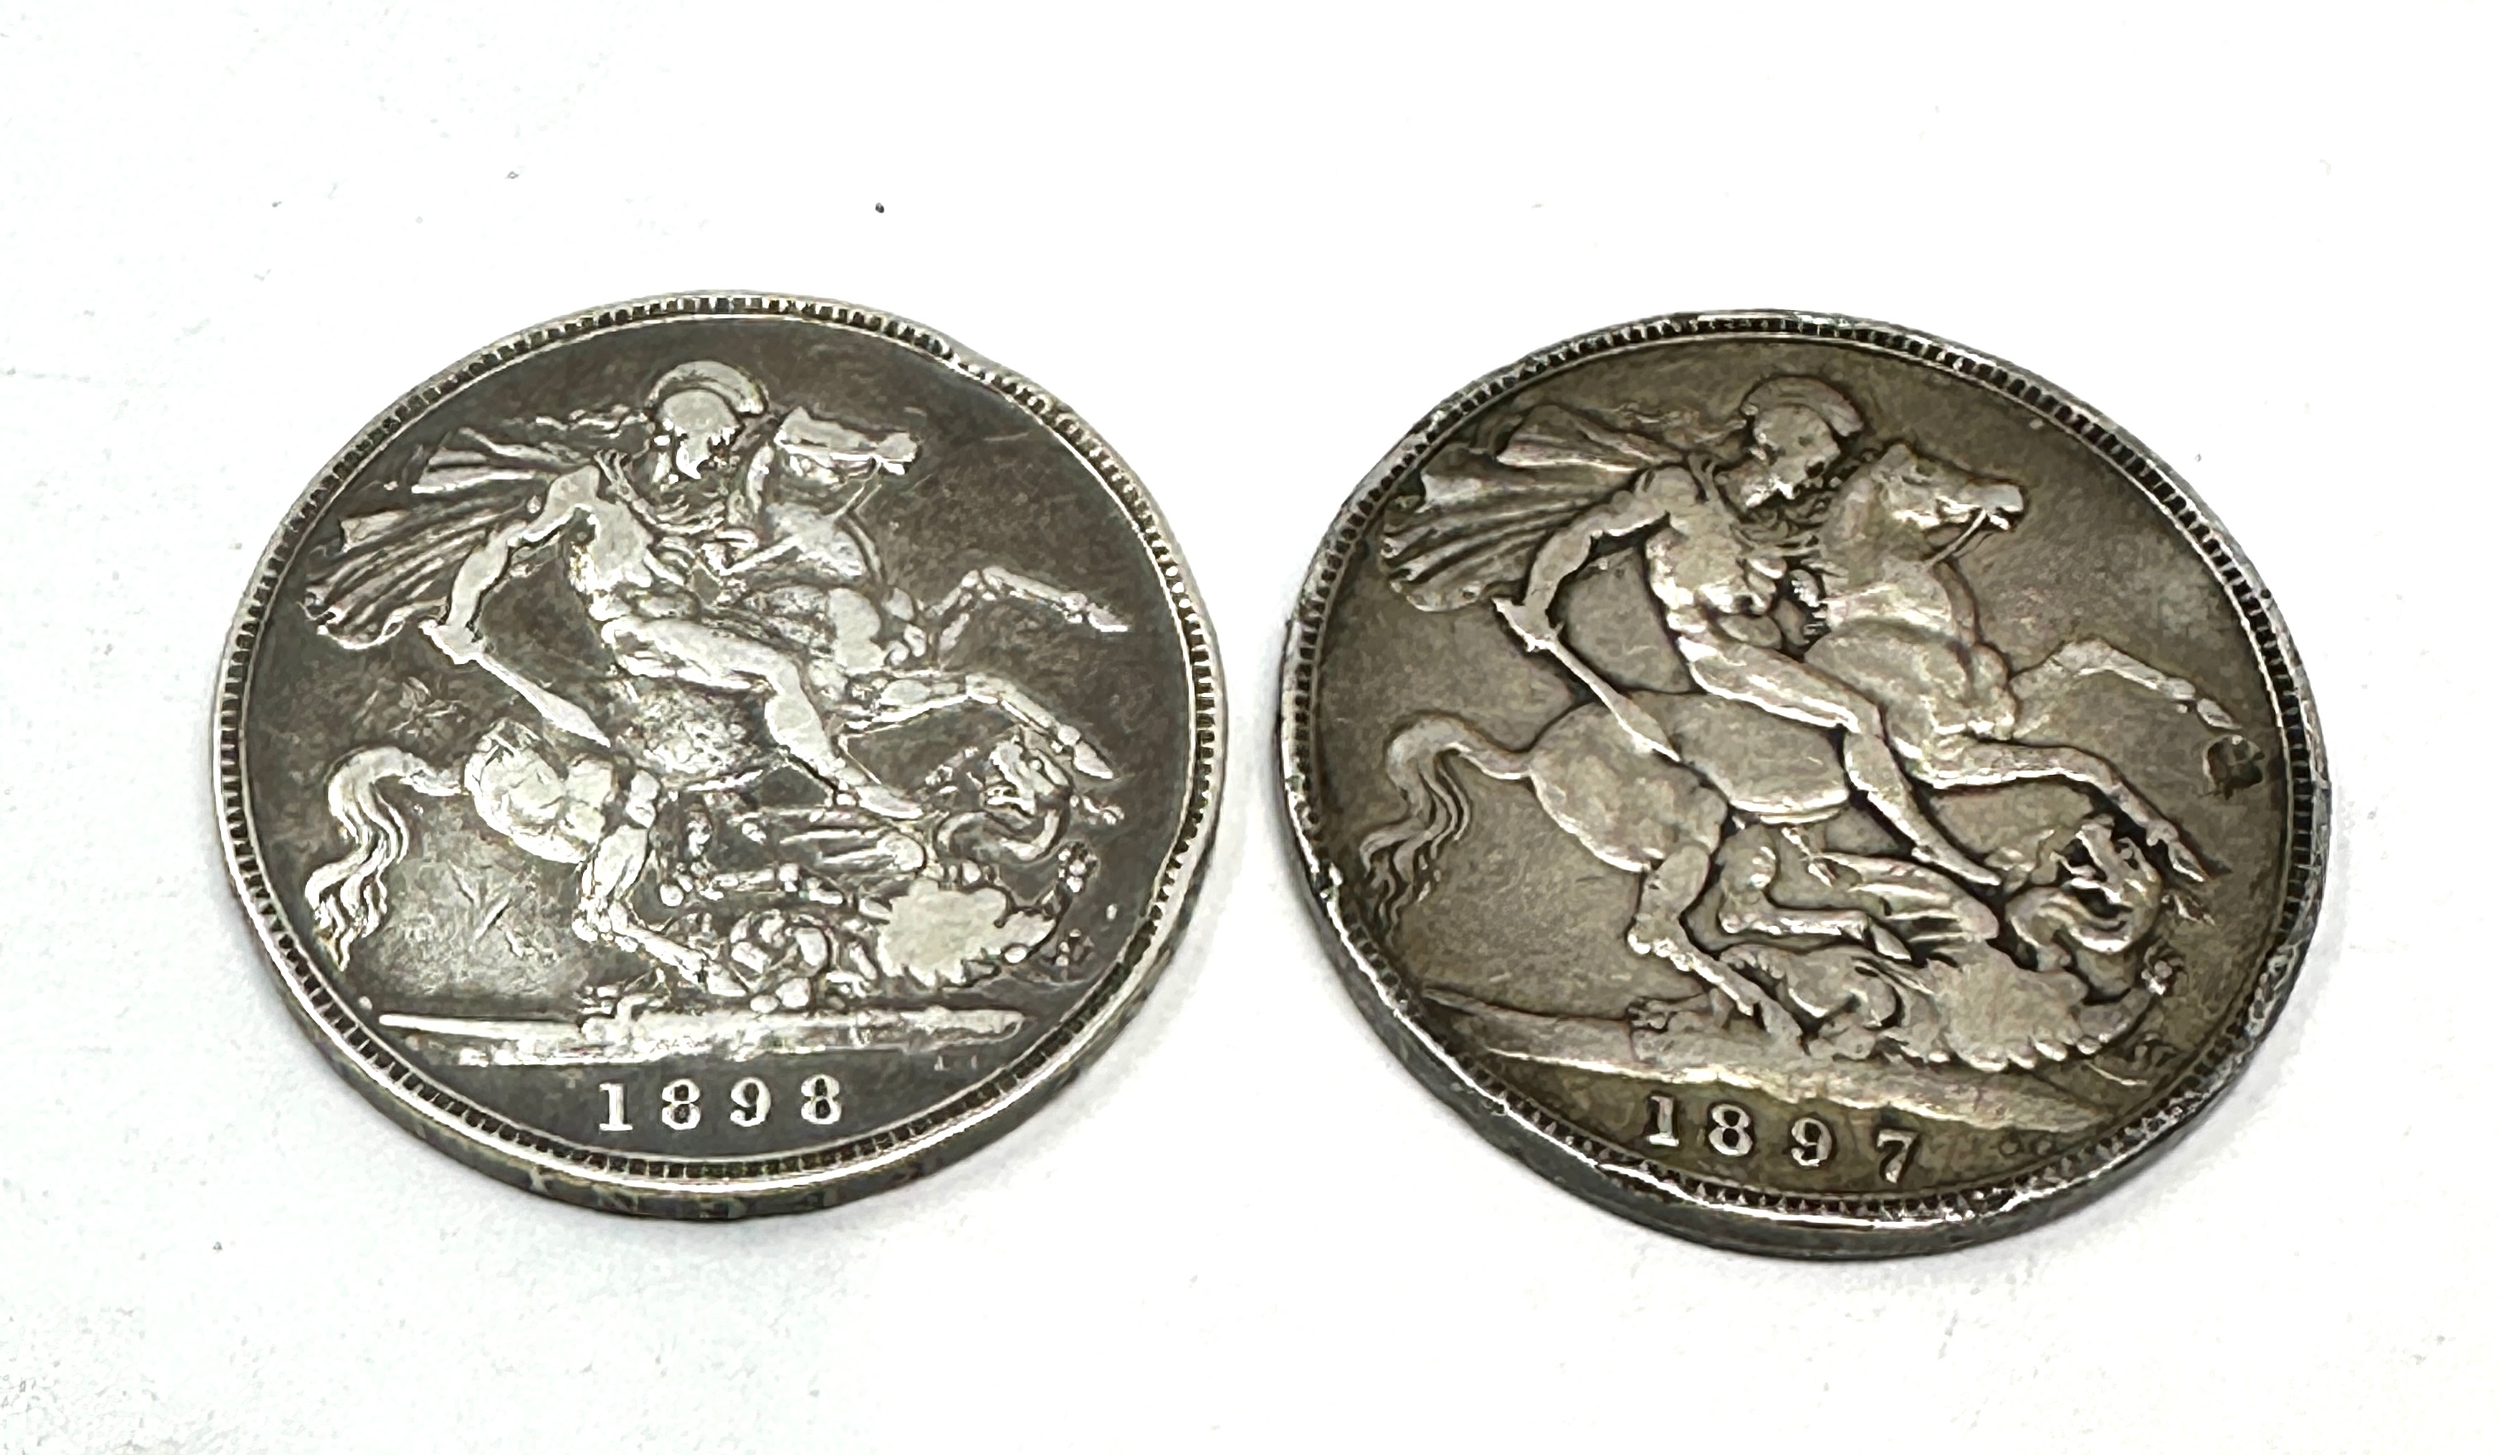 2 victorian silver crowns 1897 & 1898 - Image 2 of 4